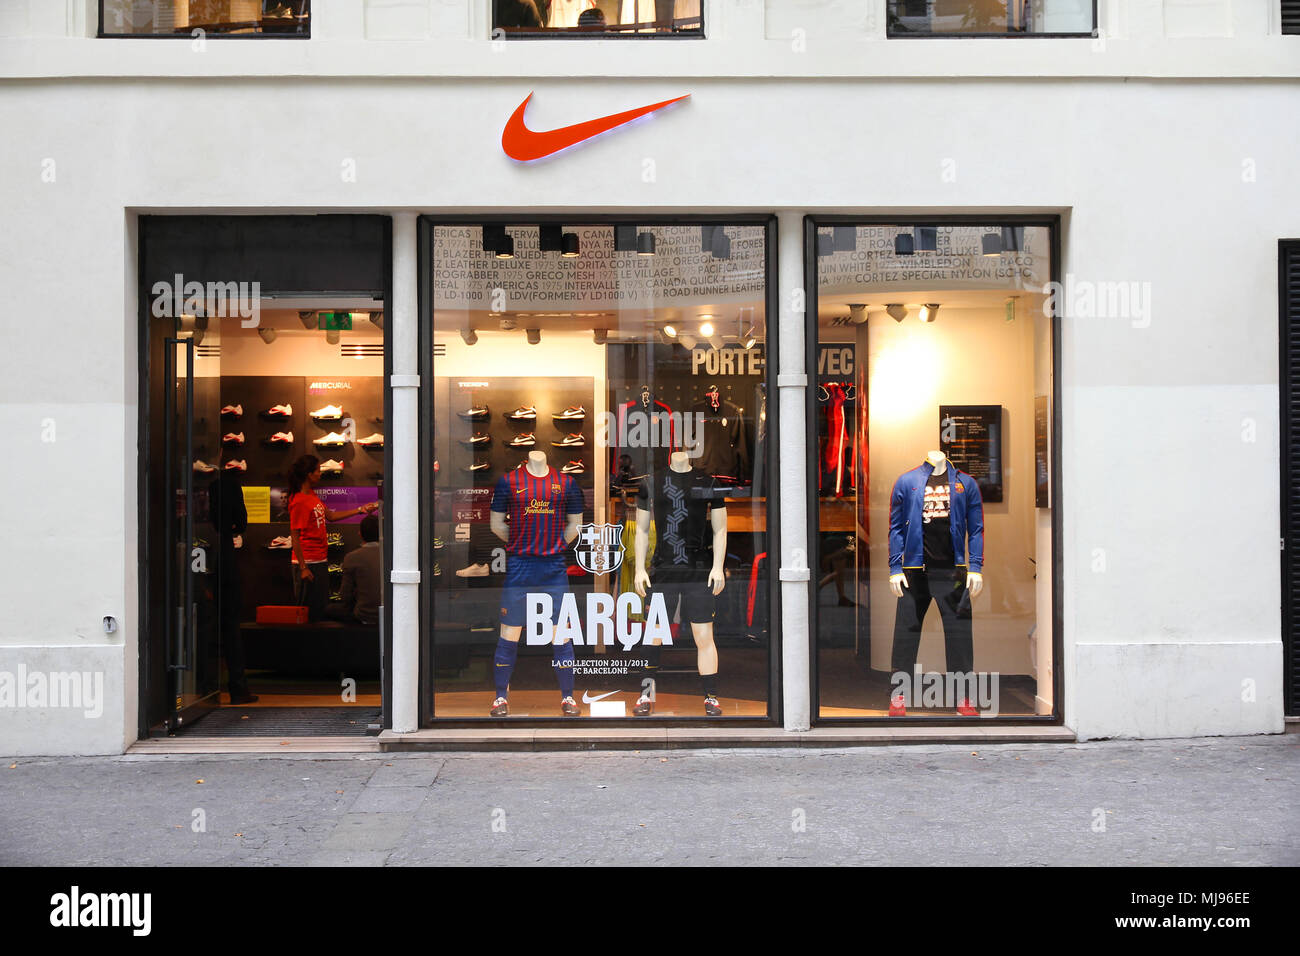 nike store re